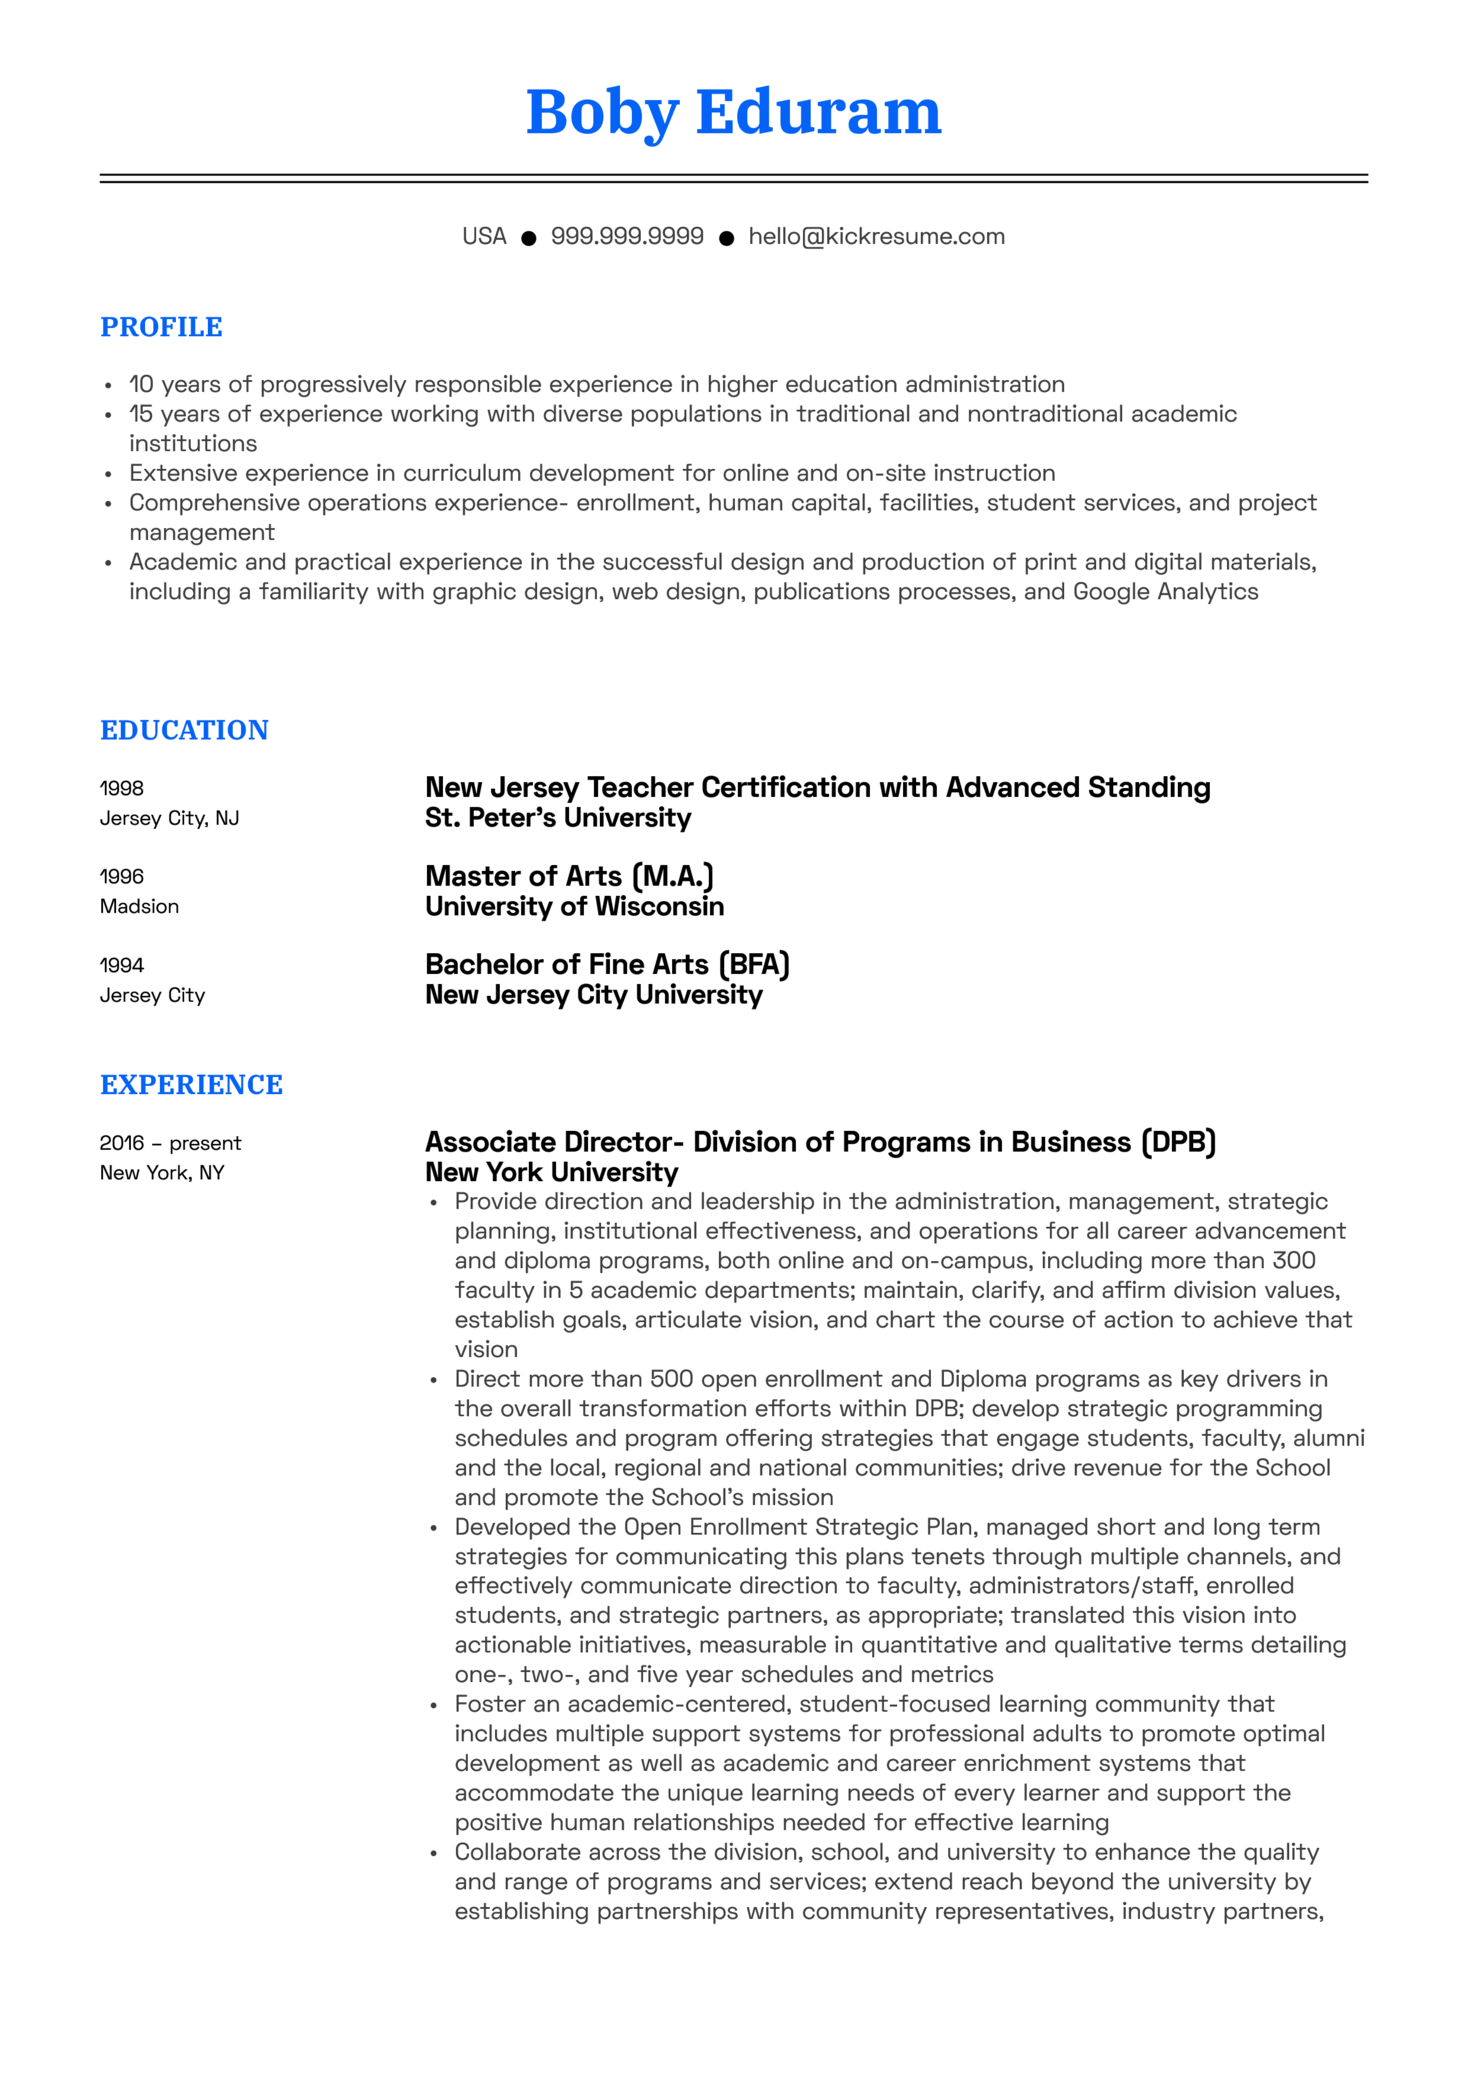 Resume example for older adults